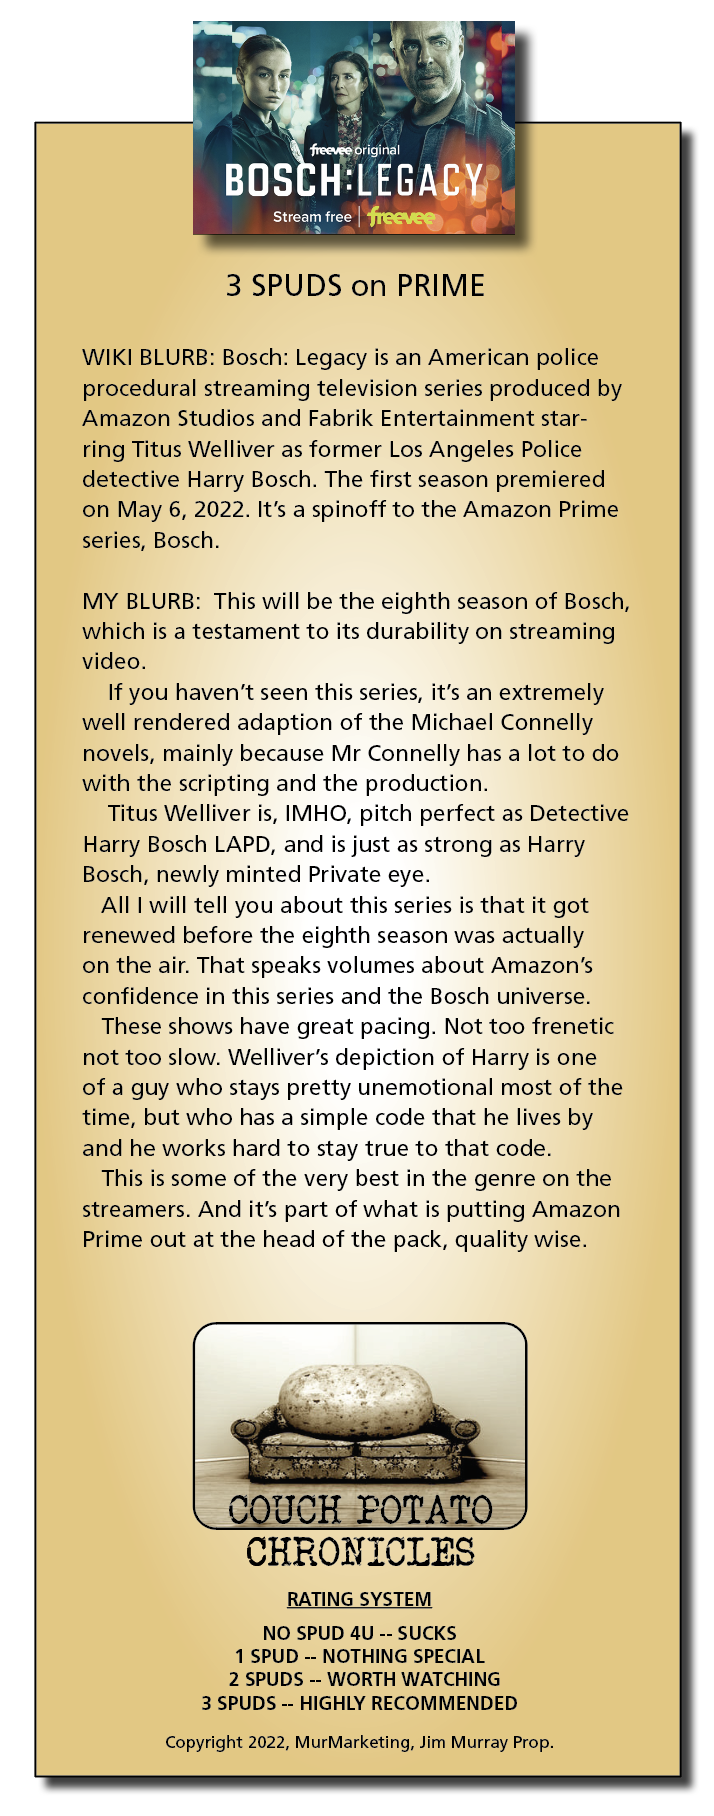 [yea

ETE ae

BLE hoo
3 SPUDS on PRIME

WIKI BLURB: Bosch: Legacy is an American police
procedural streaming television series produced by
Amazon Studios and Fabrik Entertainment star-
ring Titus Welliver as former Los Angeles Police
detective Harry Bosch. The first season premiered
on May 6, 2022. It's a spinoff to the Amazon Prime
series, Bosch

MY BLURB: This will be the eighth season of Bosch,
which is a testament to its durability on streaming
video.

If you haven't seen this series, it's an extremely
well rendered adaption of the Michael Connelly
novels, mainly because Mr Connelly has a lot to do
with the scripting and the production

Titus Welliver is, IMHO, pitch perfect as Detective
Harry Bosch LAPD, and is just as strong as Harry
Bosch, newly minted Private eye

All Twill tell you about this series is that it got
renewed before the eighth season was actually
on the air. That speaks volumes about Amazon's
confidence in this series and the Bosch universe.

These shows have great pacing. Not too frenetic
not too slow. Welliver's depiction of Harry is one
of a guy who stays pretty unemotional most of the
time, but who has a simple code that he lives by
and he works hard to stay true to that code

This is some of the very best in the genre on the
streamers. And it's part of what is putting Amazon
Prime out at the head of the pack, quality wise.

CHR ONICLES

RATING SYSTEM

NO SPUD 4U -- SUCKS
1 SPUD -- NOTHING SPECIAL
2 SPUDS -- WORTH WATCHING
3 SPUDS -- HIGHLY RECOMMENDED

Copynght 2022, MurMarketing, Jim Murray Prop